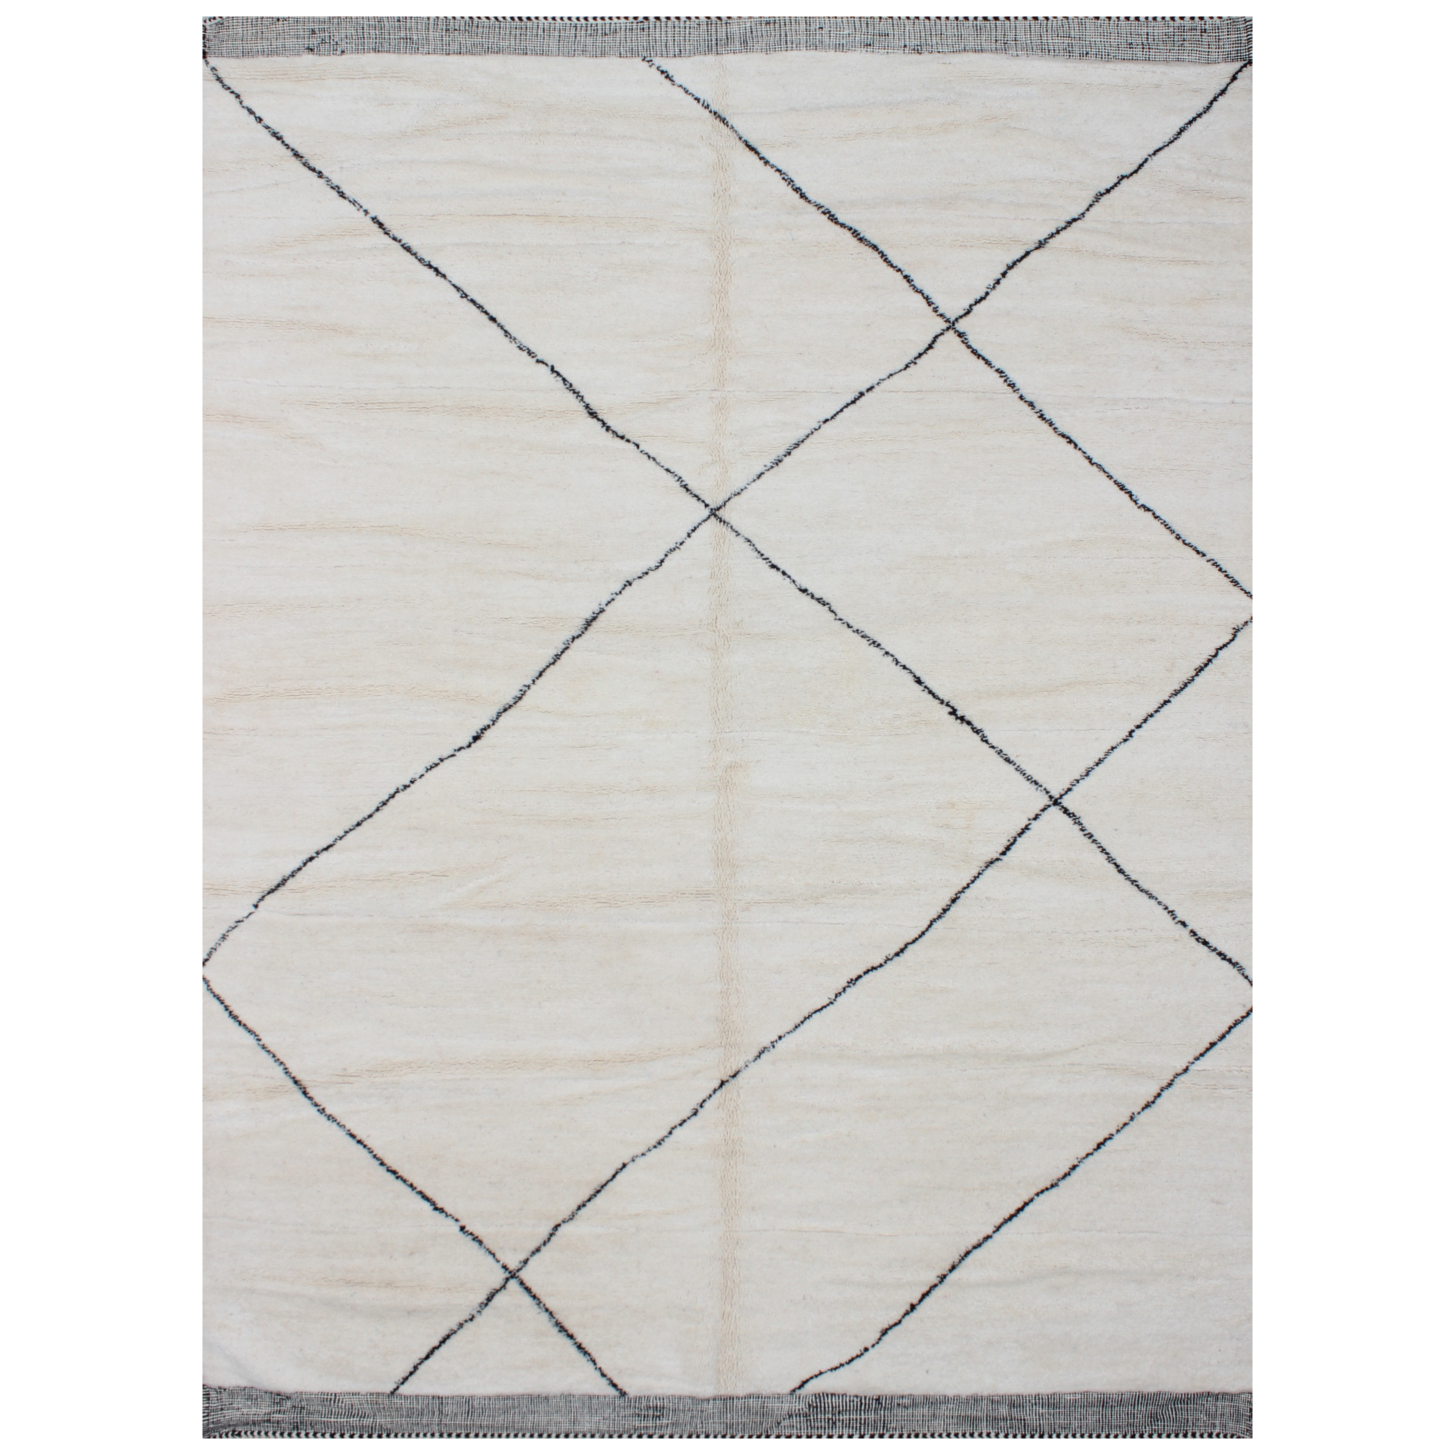 About the Moroccan Collection:These transitional, modern rugs are hand knotted and sheared to an extra-long pile.